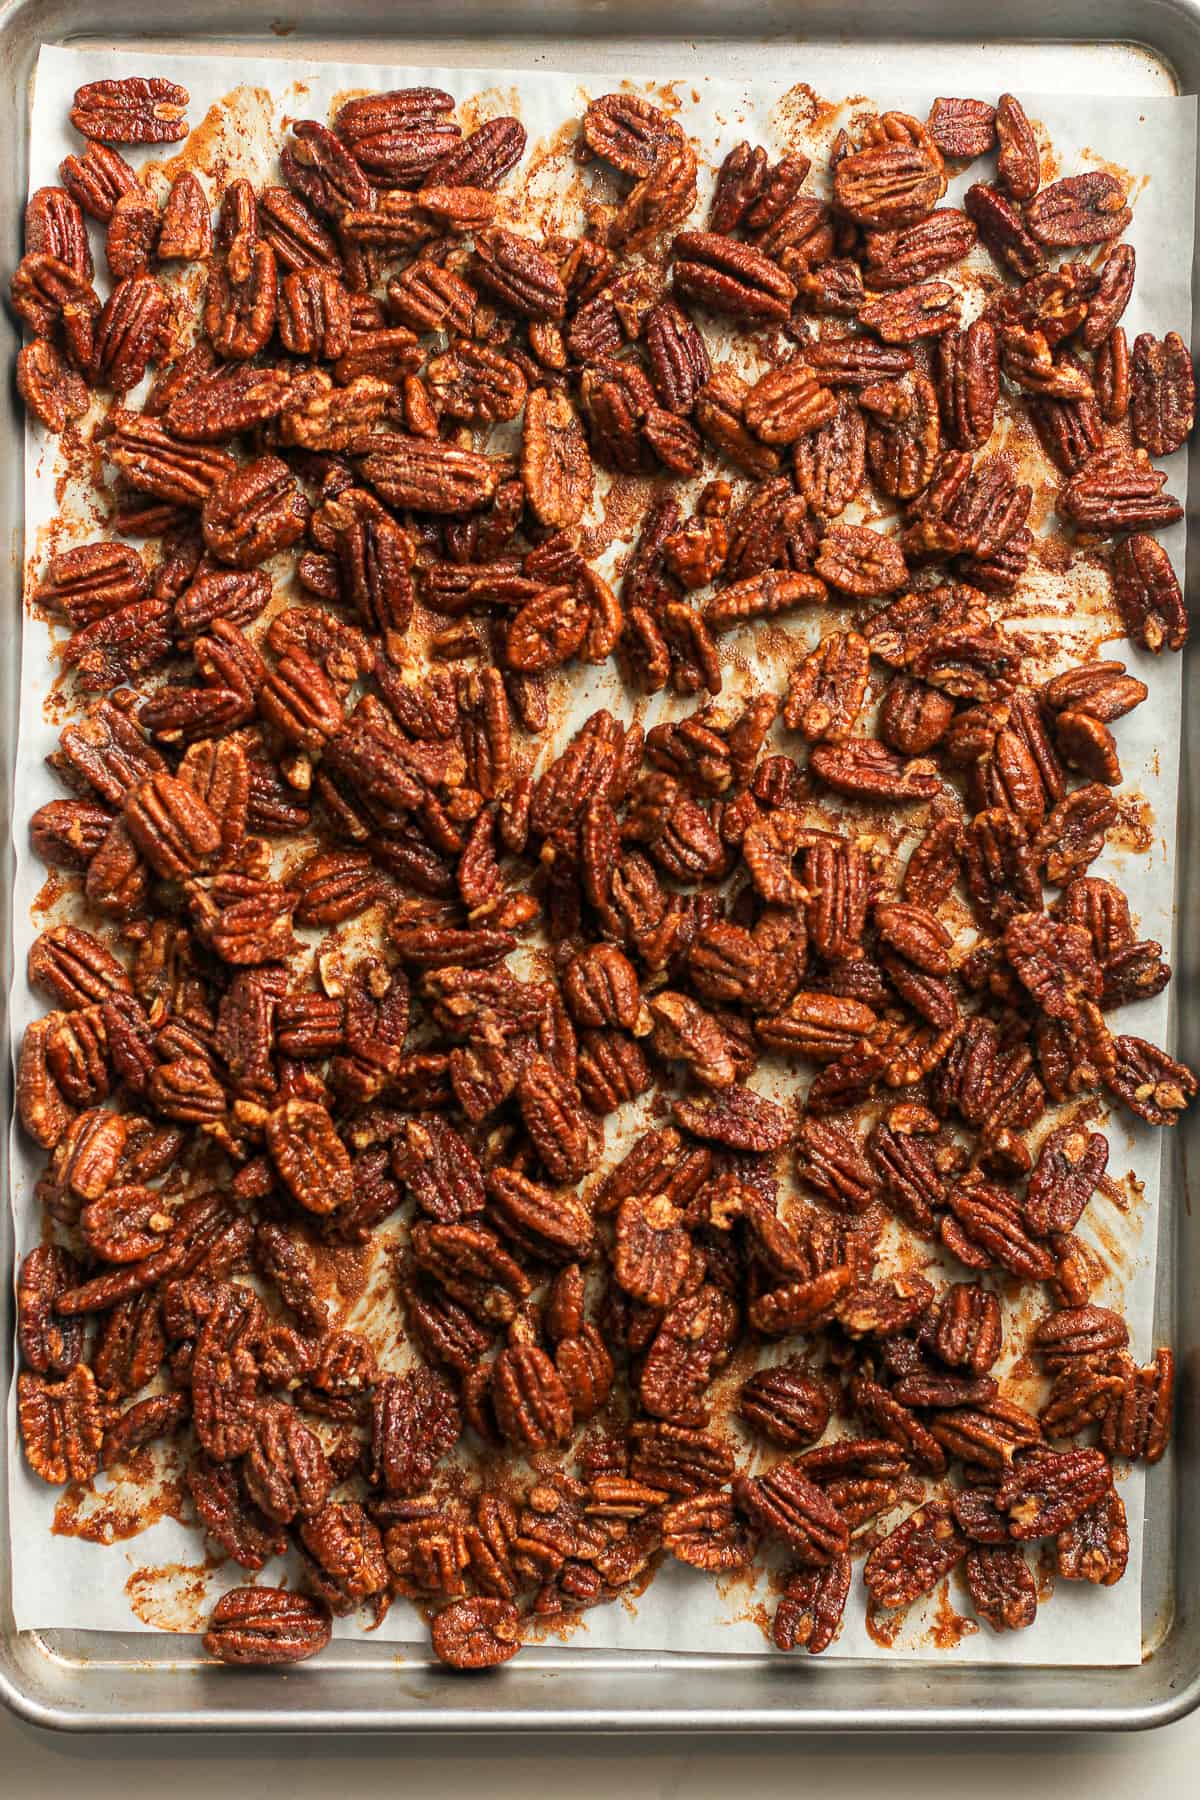 The pan of baked pecans.